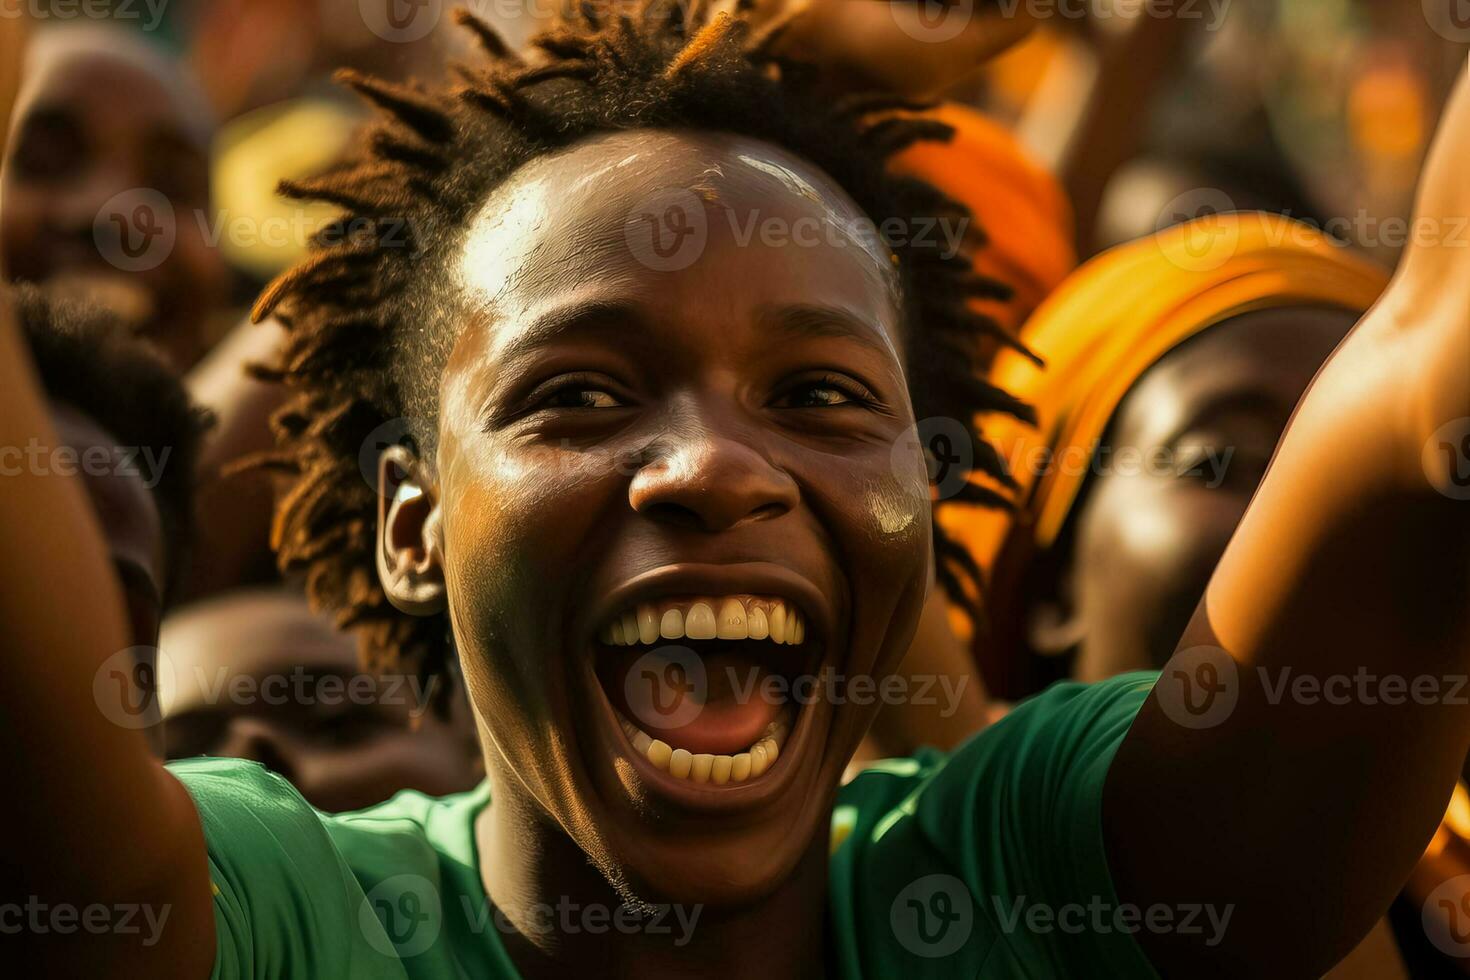 Burkinabe football fans celebrating a victory photo